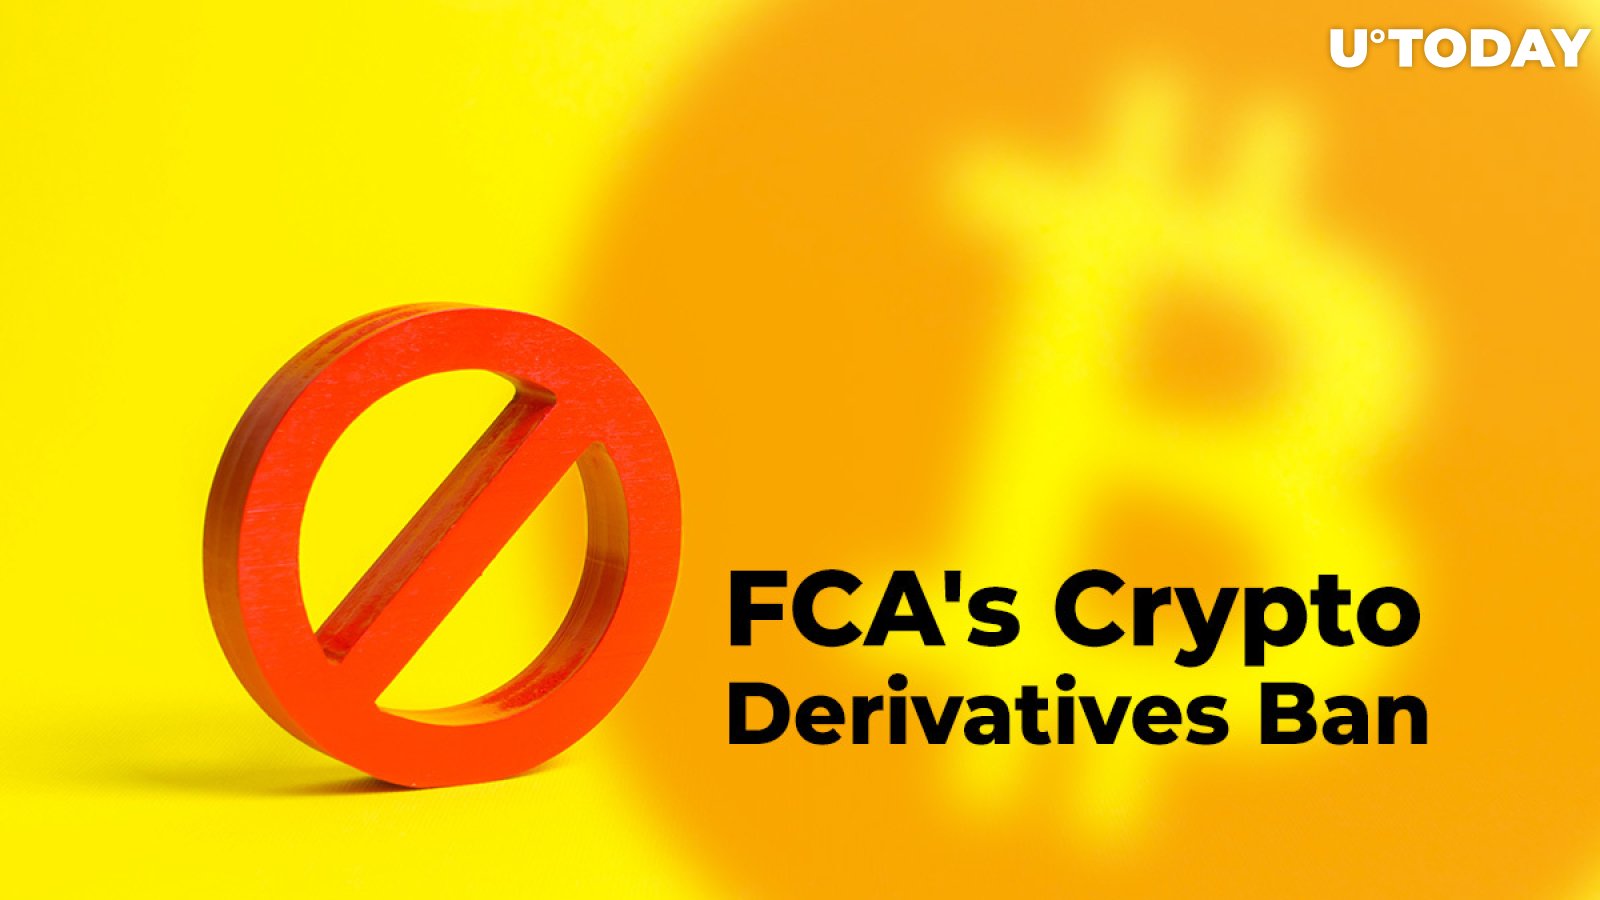 FCA's Crypto Derivatives Ban Is Bullish for Bitcoin. Here's Why